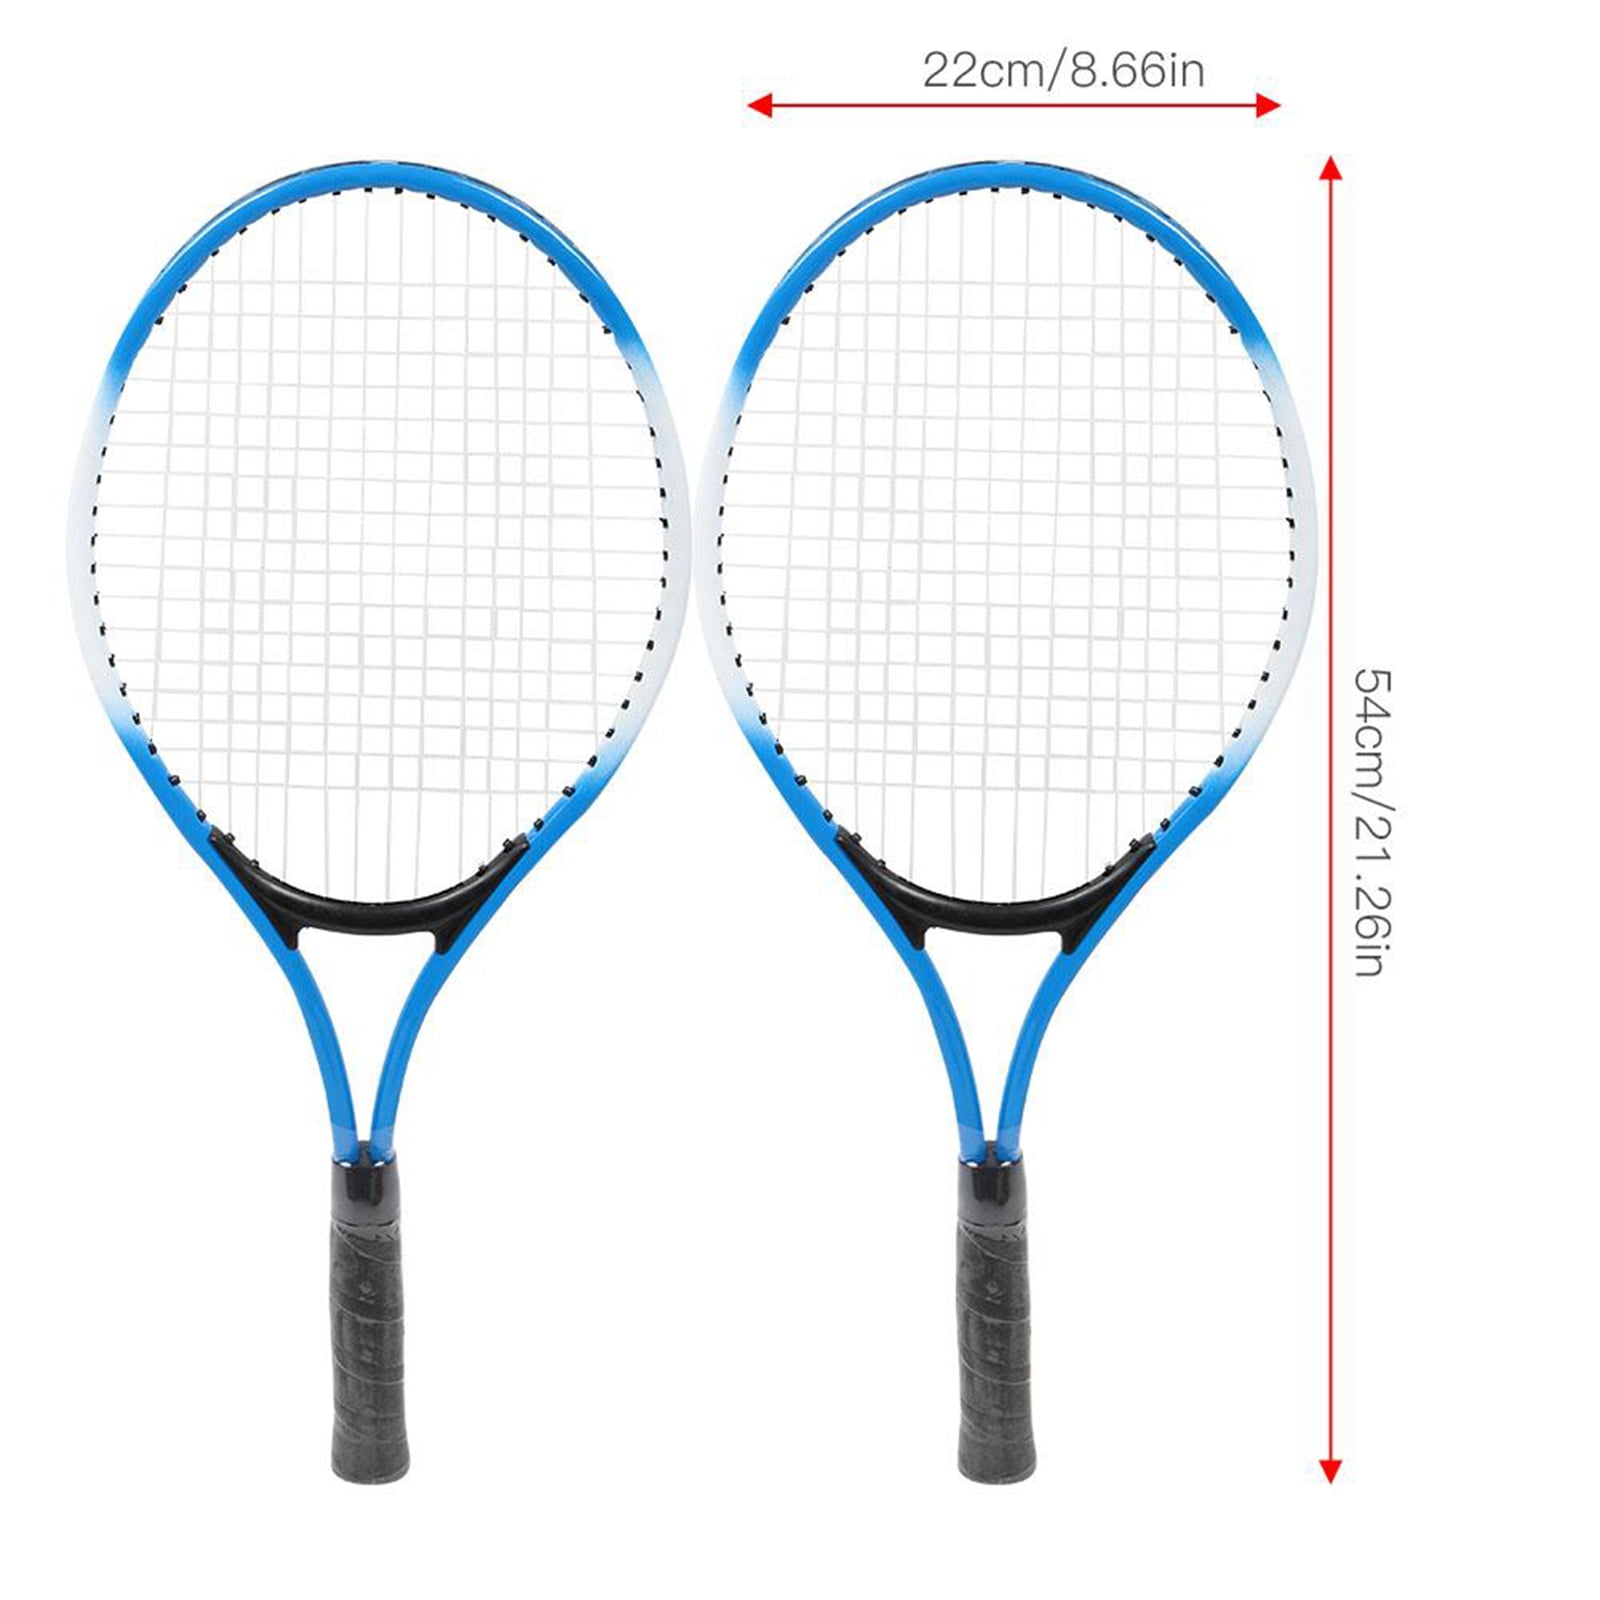 Details about   Alloy Tennis Racket Racquet Practice For Junior Tennis Initial Training 